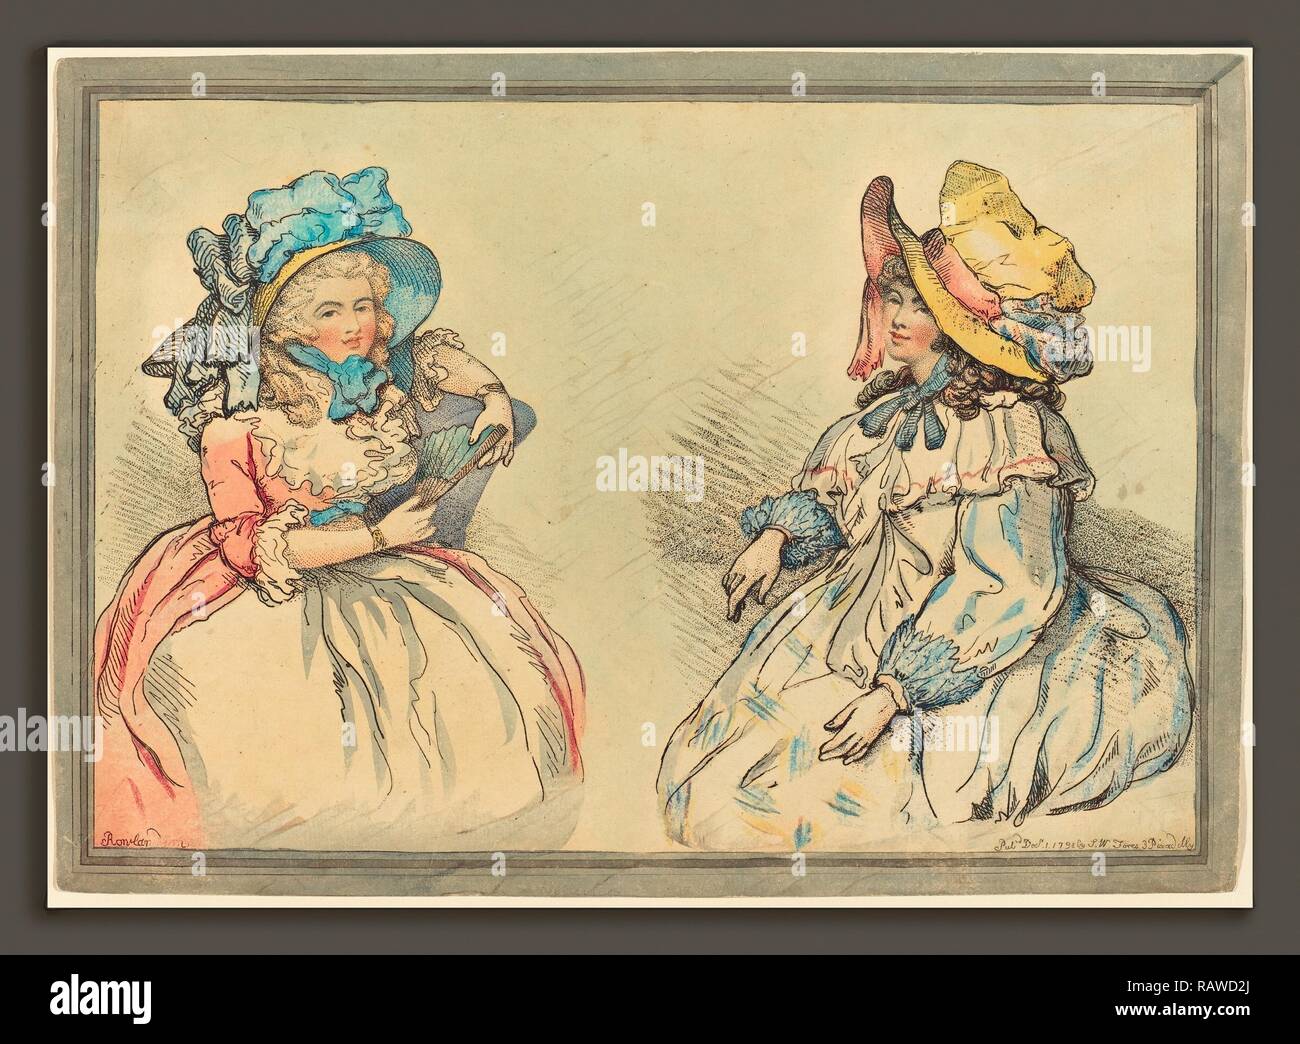 Thomas Rowlandson (British, 1756 - 1827), Beauties, published 1792, hand-colored etching. Reimagined Stock Photo